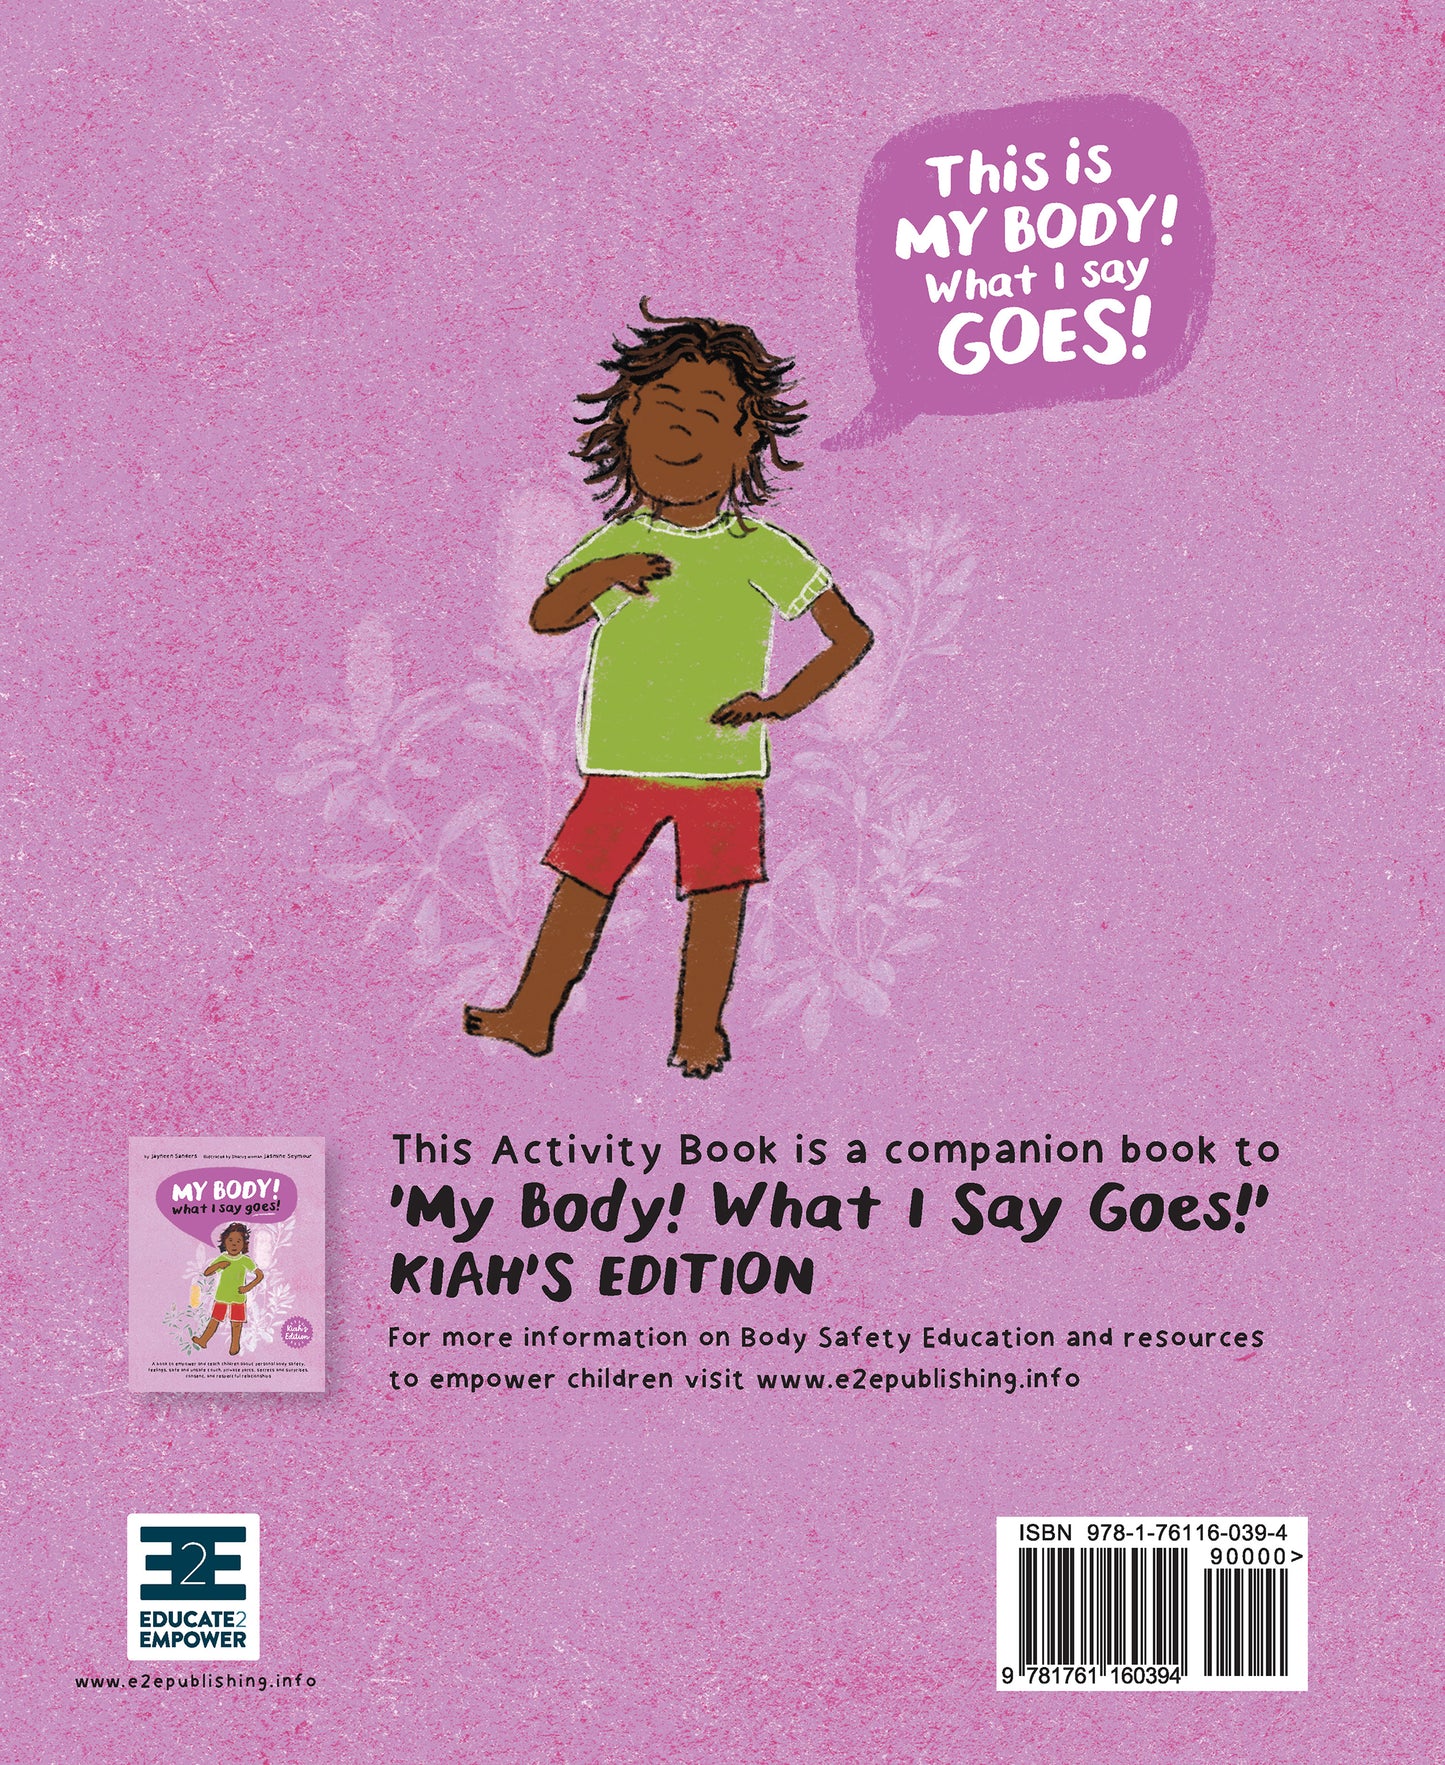 A back cover of the book 'My Body! what I Say Goes! Kiah's Edition. Activity Book' by Jayneen Sanders